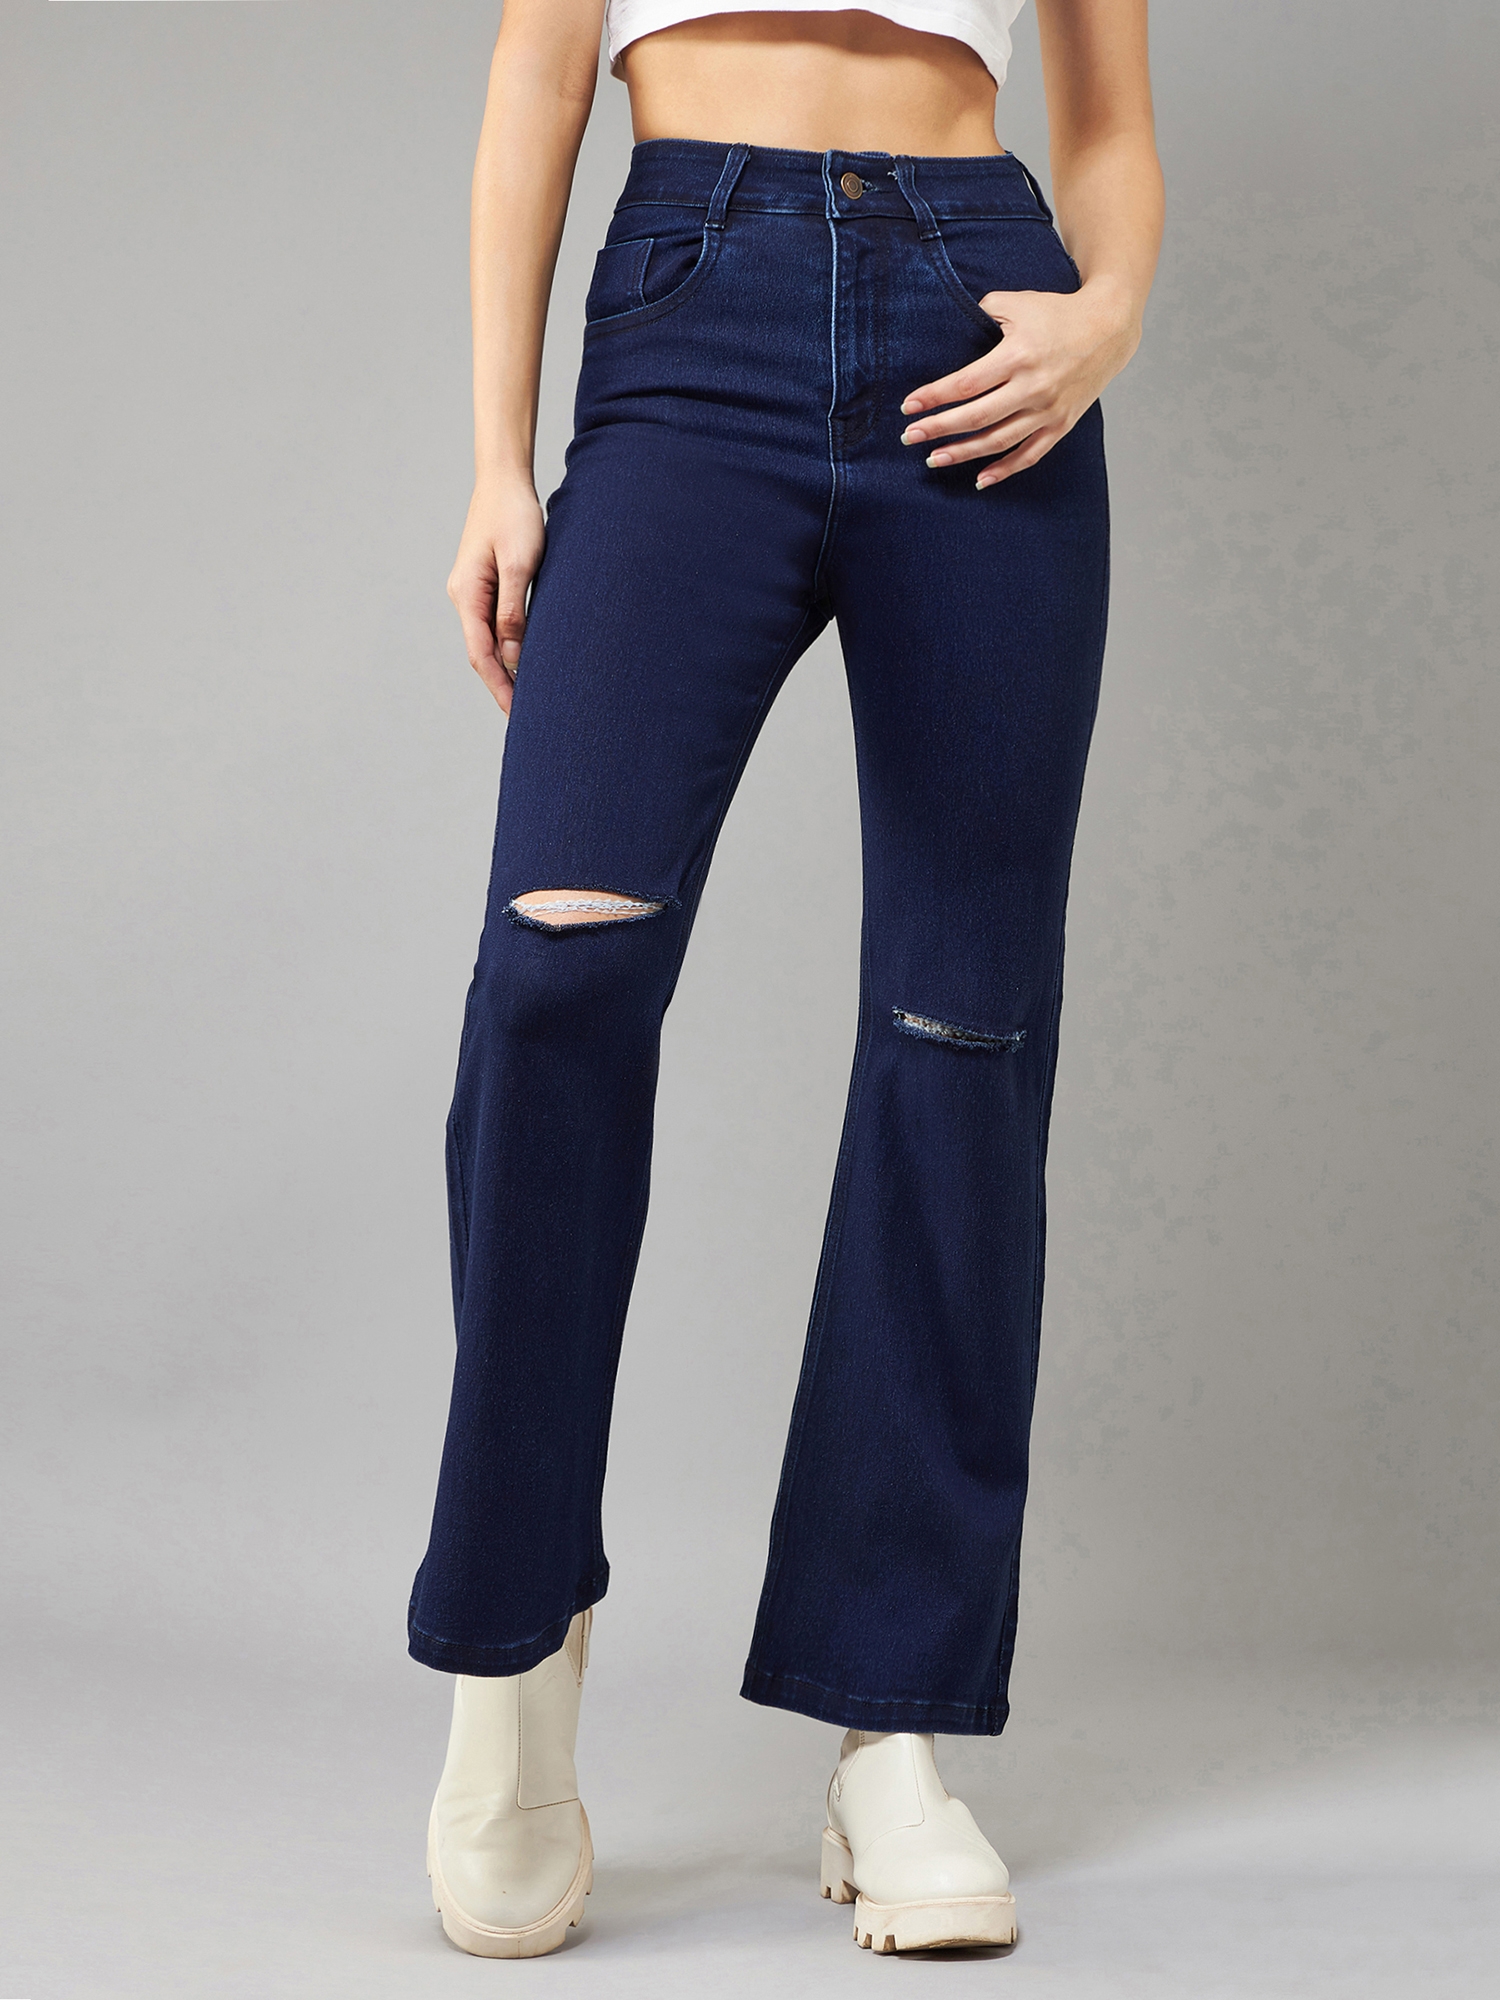 Women's Navy Blue Bootcut High Rise Clean Look Regular Stretchable Denim Jeans